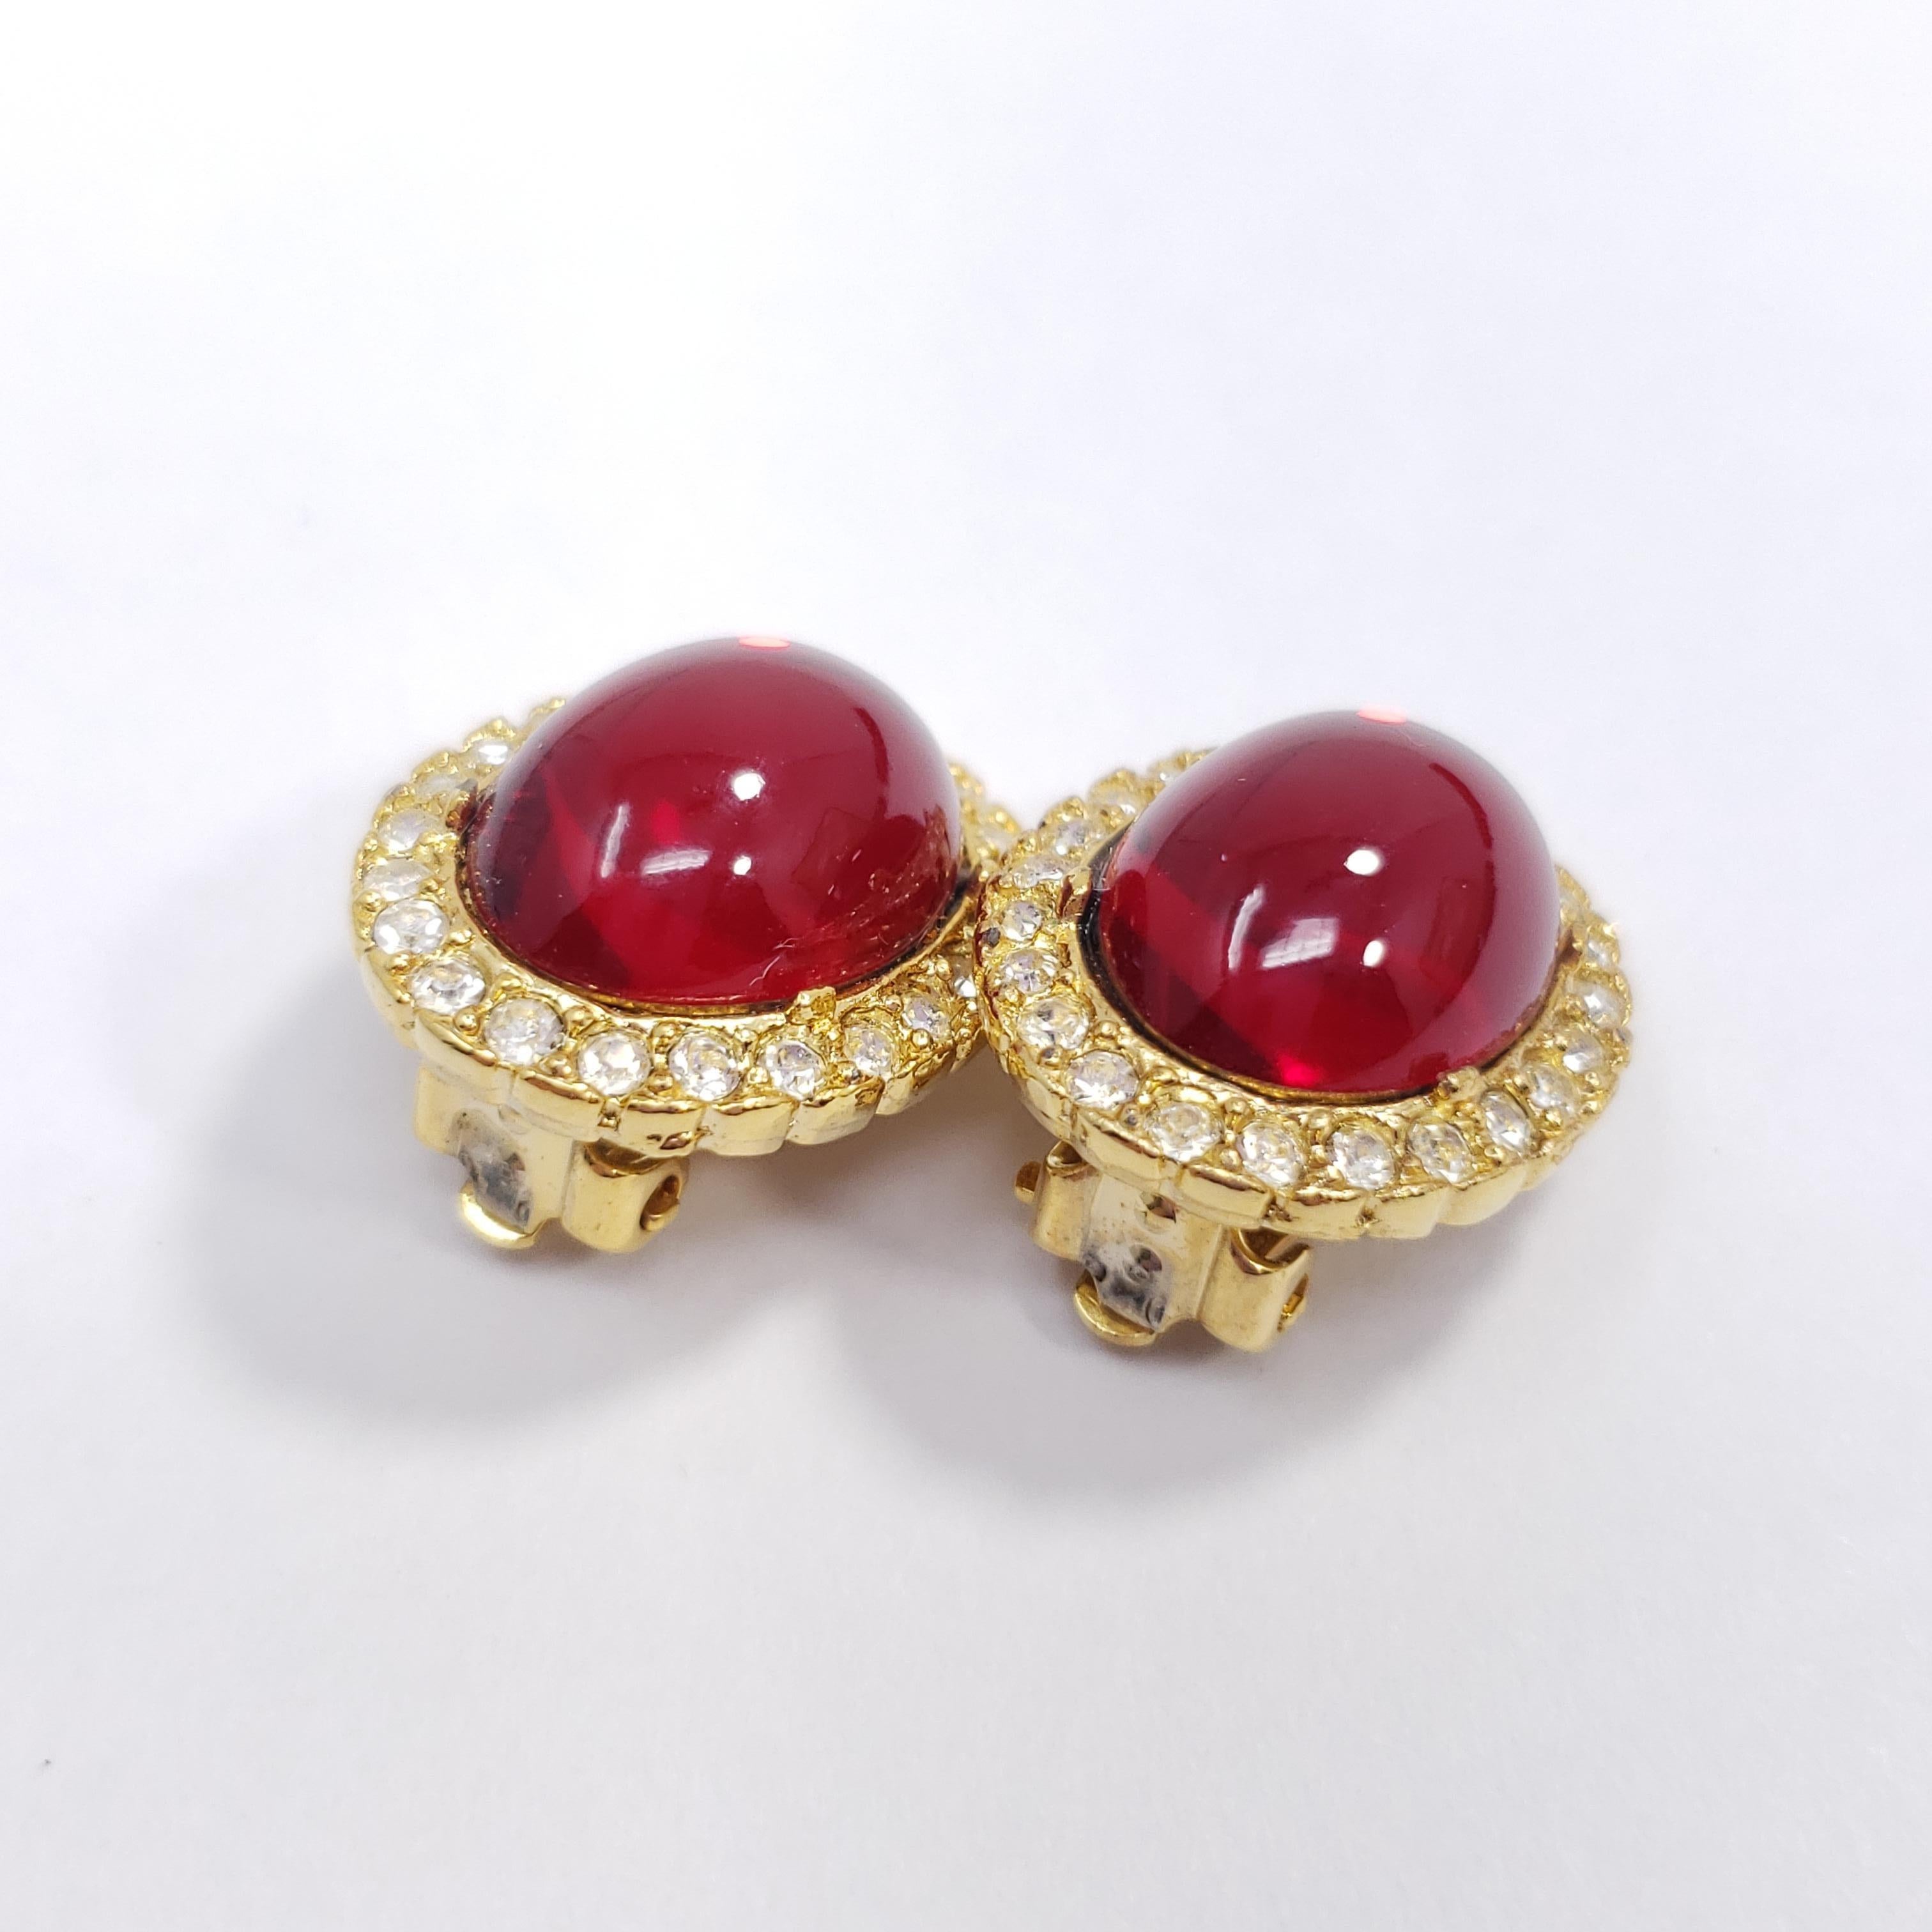 A pair of  exquisite clip on earrings, each featuring a single, royal, ruby-red cabochon accented with smaller crystals, set on a golden clip.

Gold-filled. Made in the USA. Circa mid to late 20th century.

Each earring approx. 1 inch by 0.7 inch